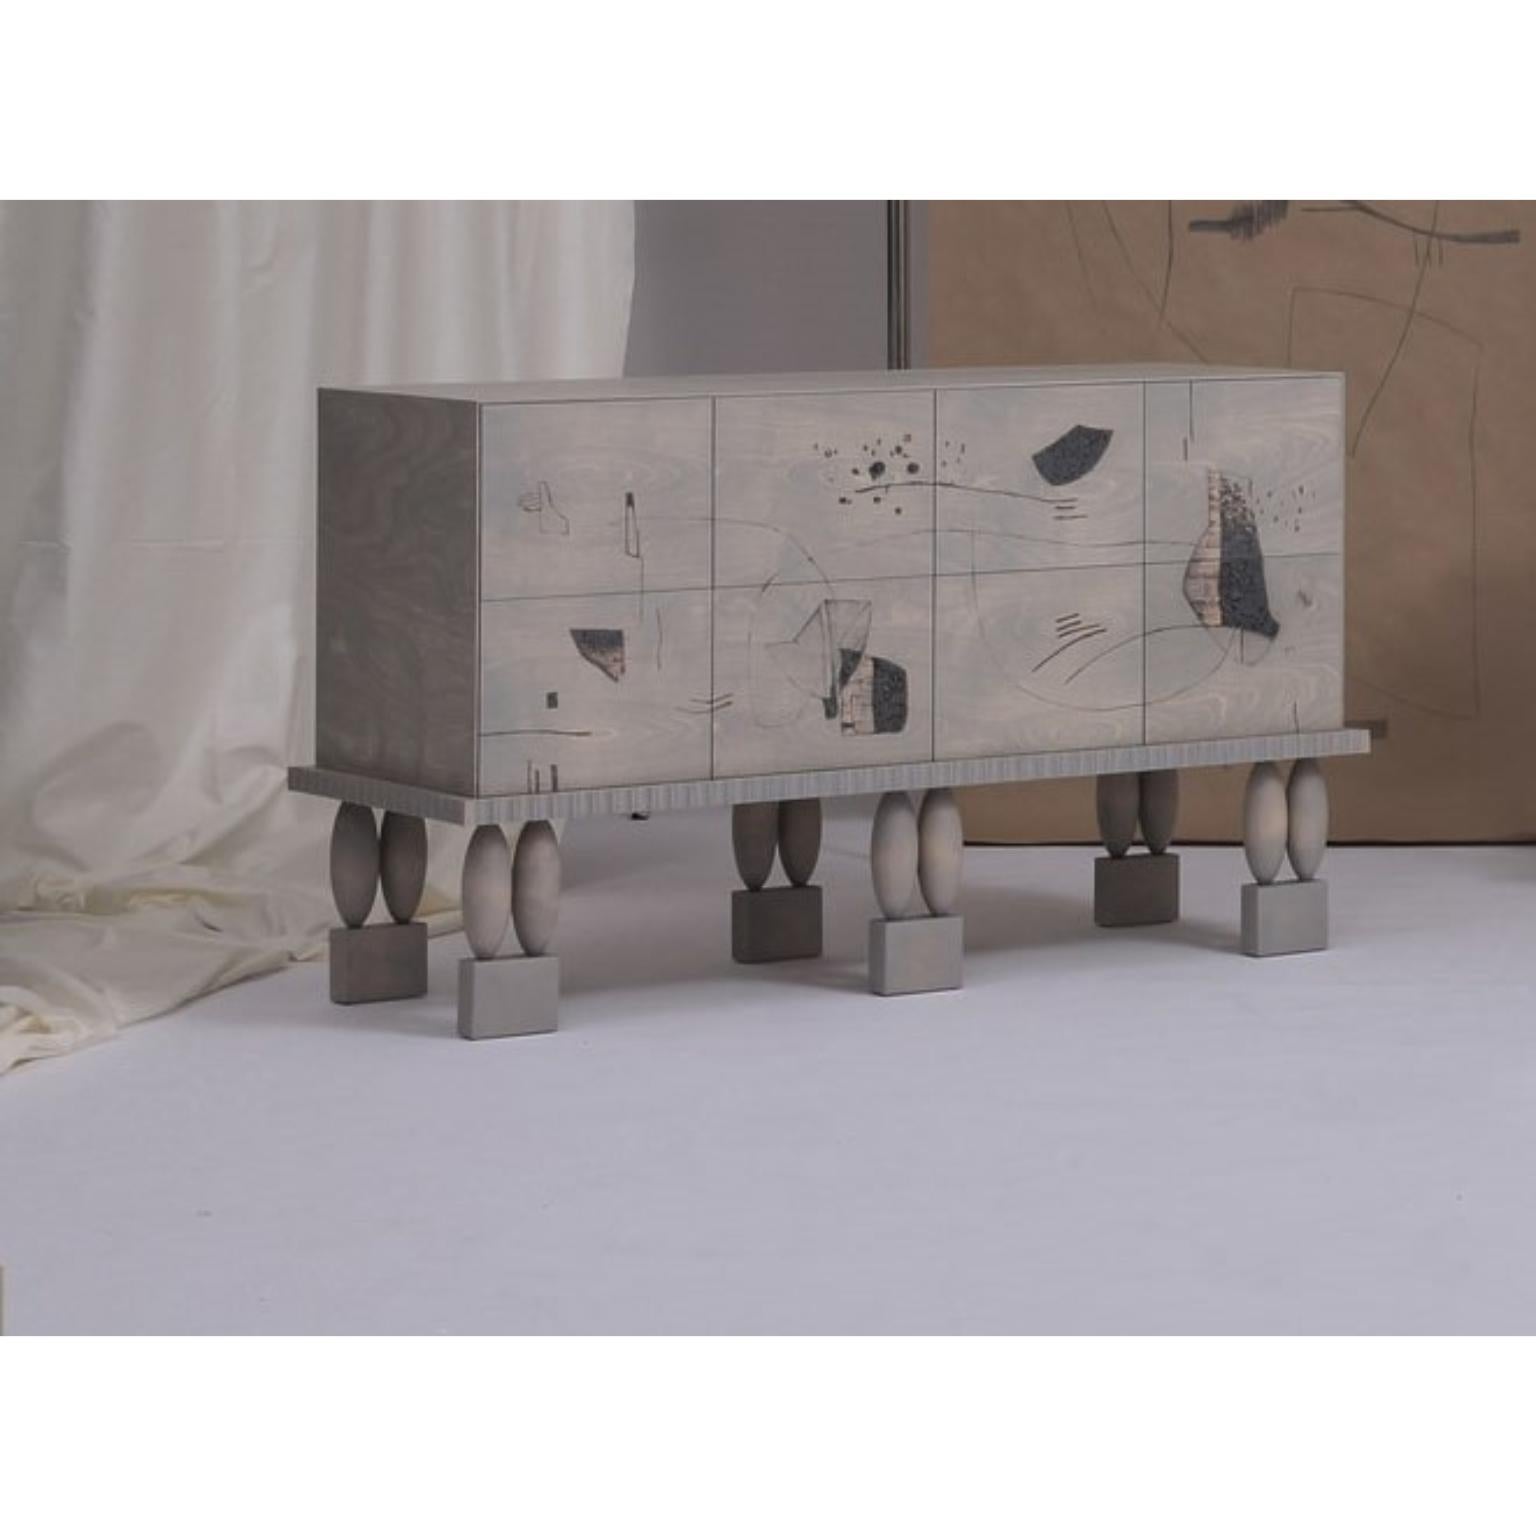 Handmade low commode with Pyrography by Jirí Krejcirík
Dimensions: 130 x 50 x 77 cm
Material: Birch wood
Also available in other materials and dimensions.

The furniture is inspired by Czech Art Nouveau aesthetics and interdisciplinary artists